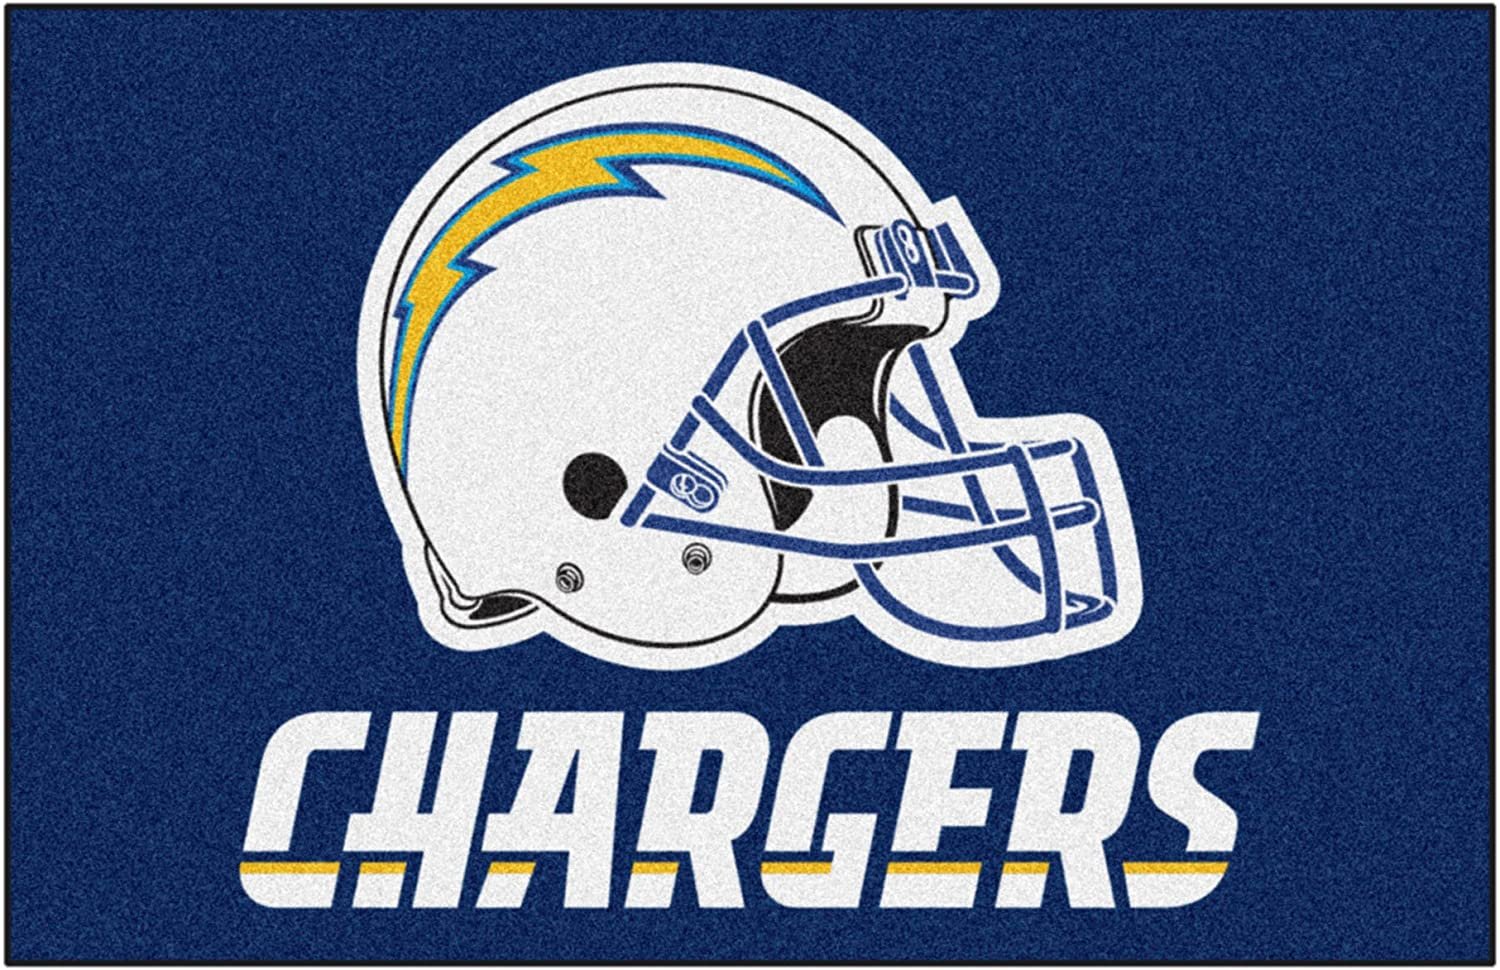 Los Angeles Chargers Floor Mat Area Rug, 20x30 Inch, Nylon, Anti-Skid Backing